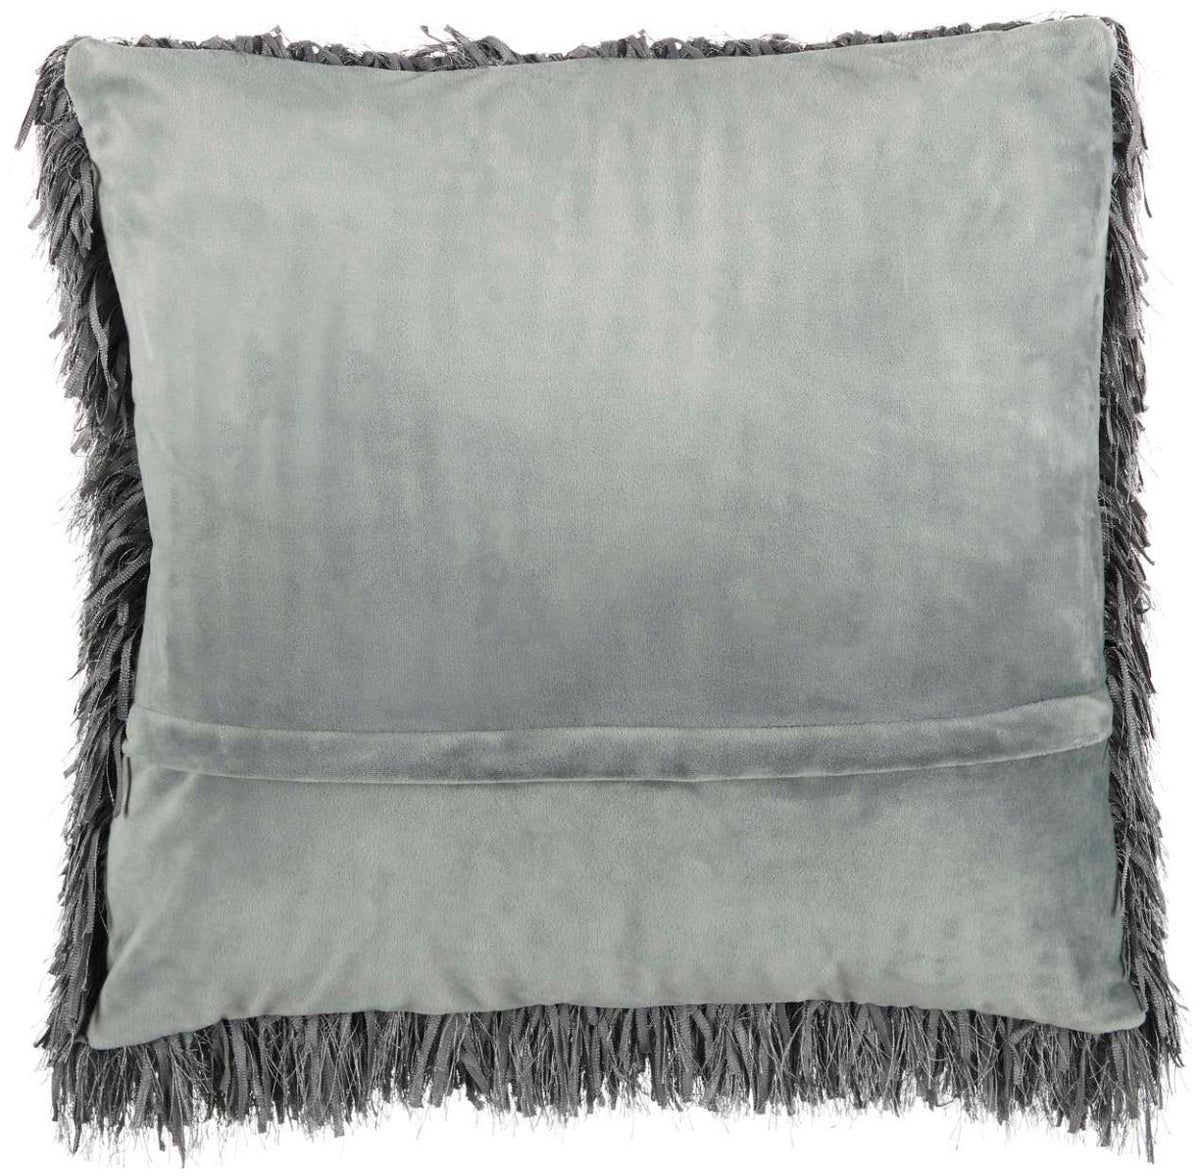 Nuria 20" x 20" Charcoal Throw Pillow - Elegance Collection